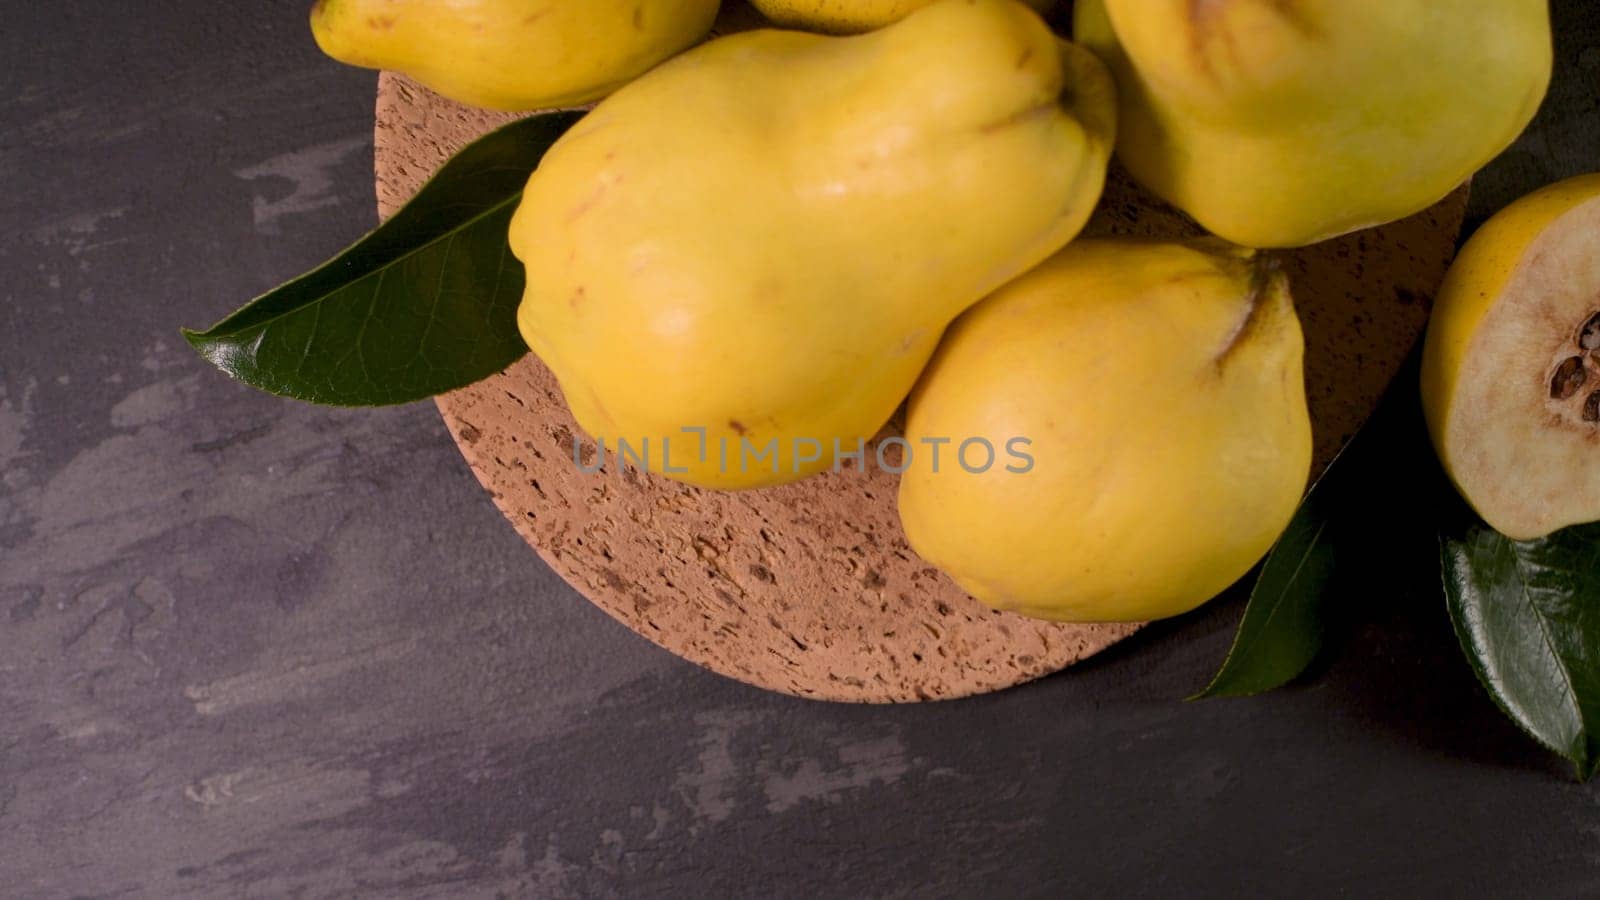 Ripe yellow quinces or queen apple fruits and sliced quince halves with seeds in craft cork plates on black rustic background.